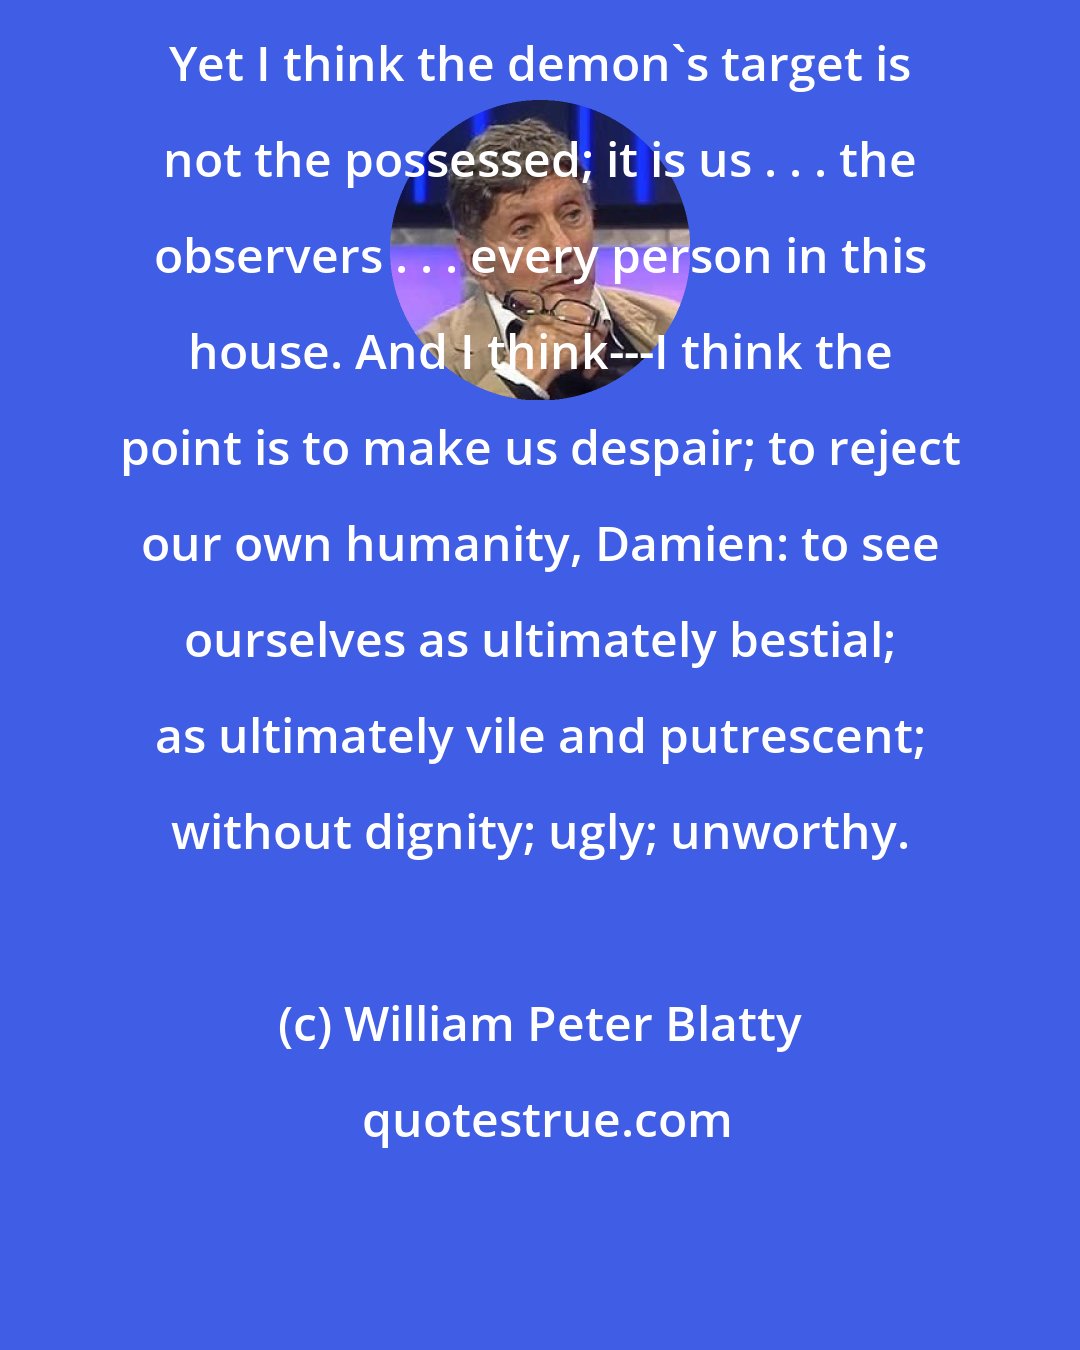 William Peter Blatty: Yet I think the demon's target is not the possessed; it is us . . . the observers . . . every person in this house. And I think---I think the point is to make us despair; to reject our own humanity, Damien: to see ourselves as ultimately bestial; as ultimately vile and putrescent; without dignity; ugly; unworthy.